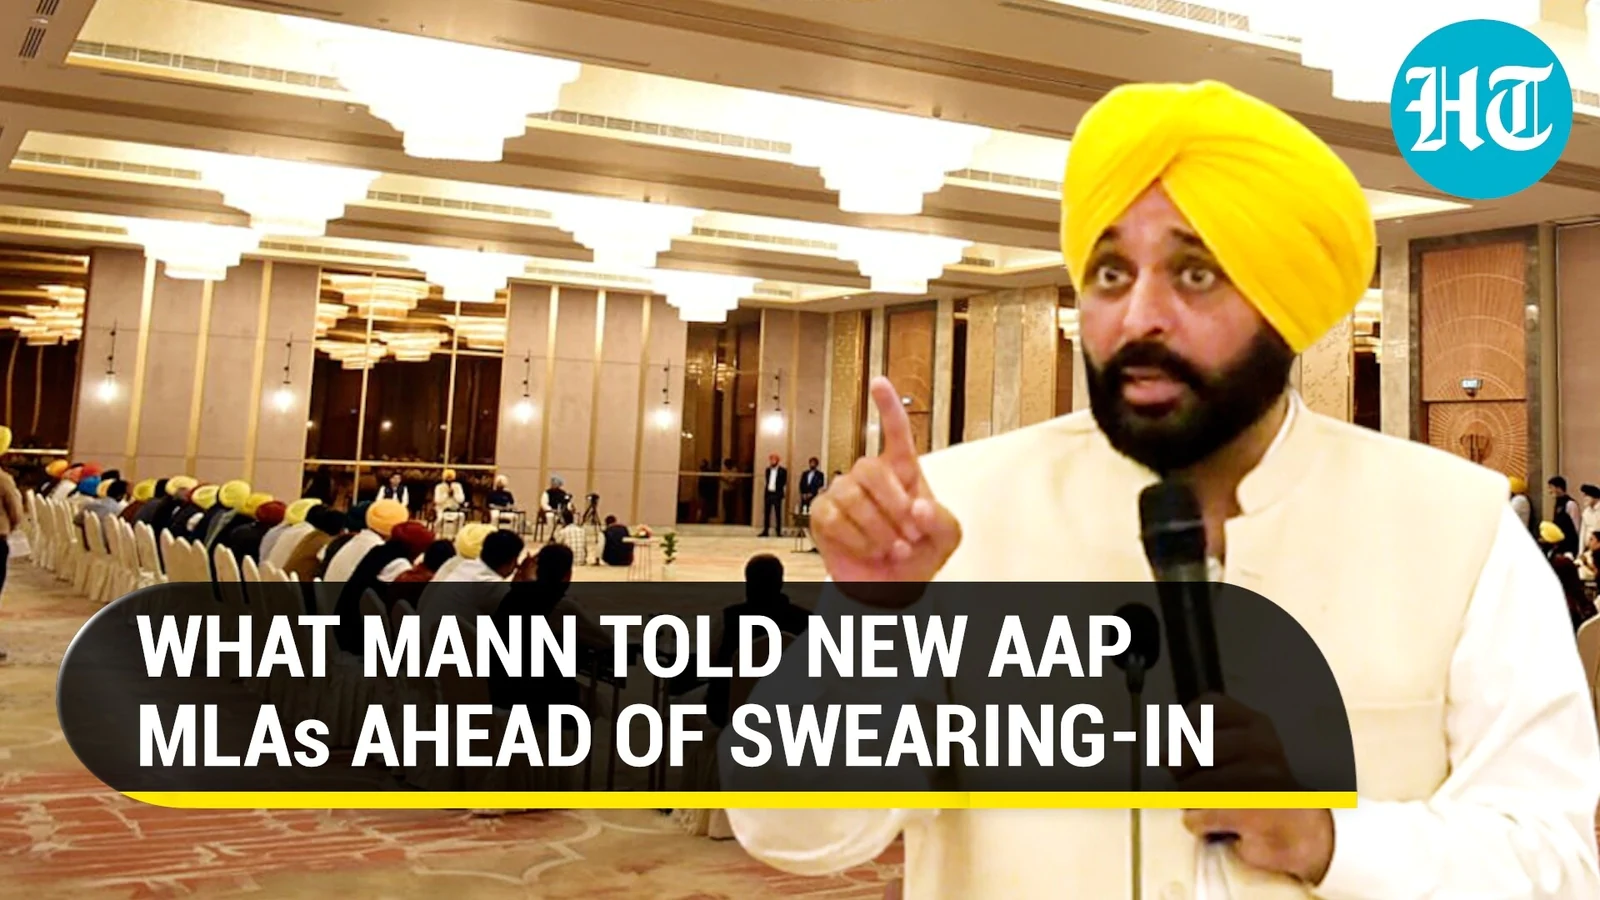 ‘You are Punjab’s MLAs’: Bhagwant Mann’s message for new AAP MLAs